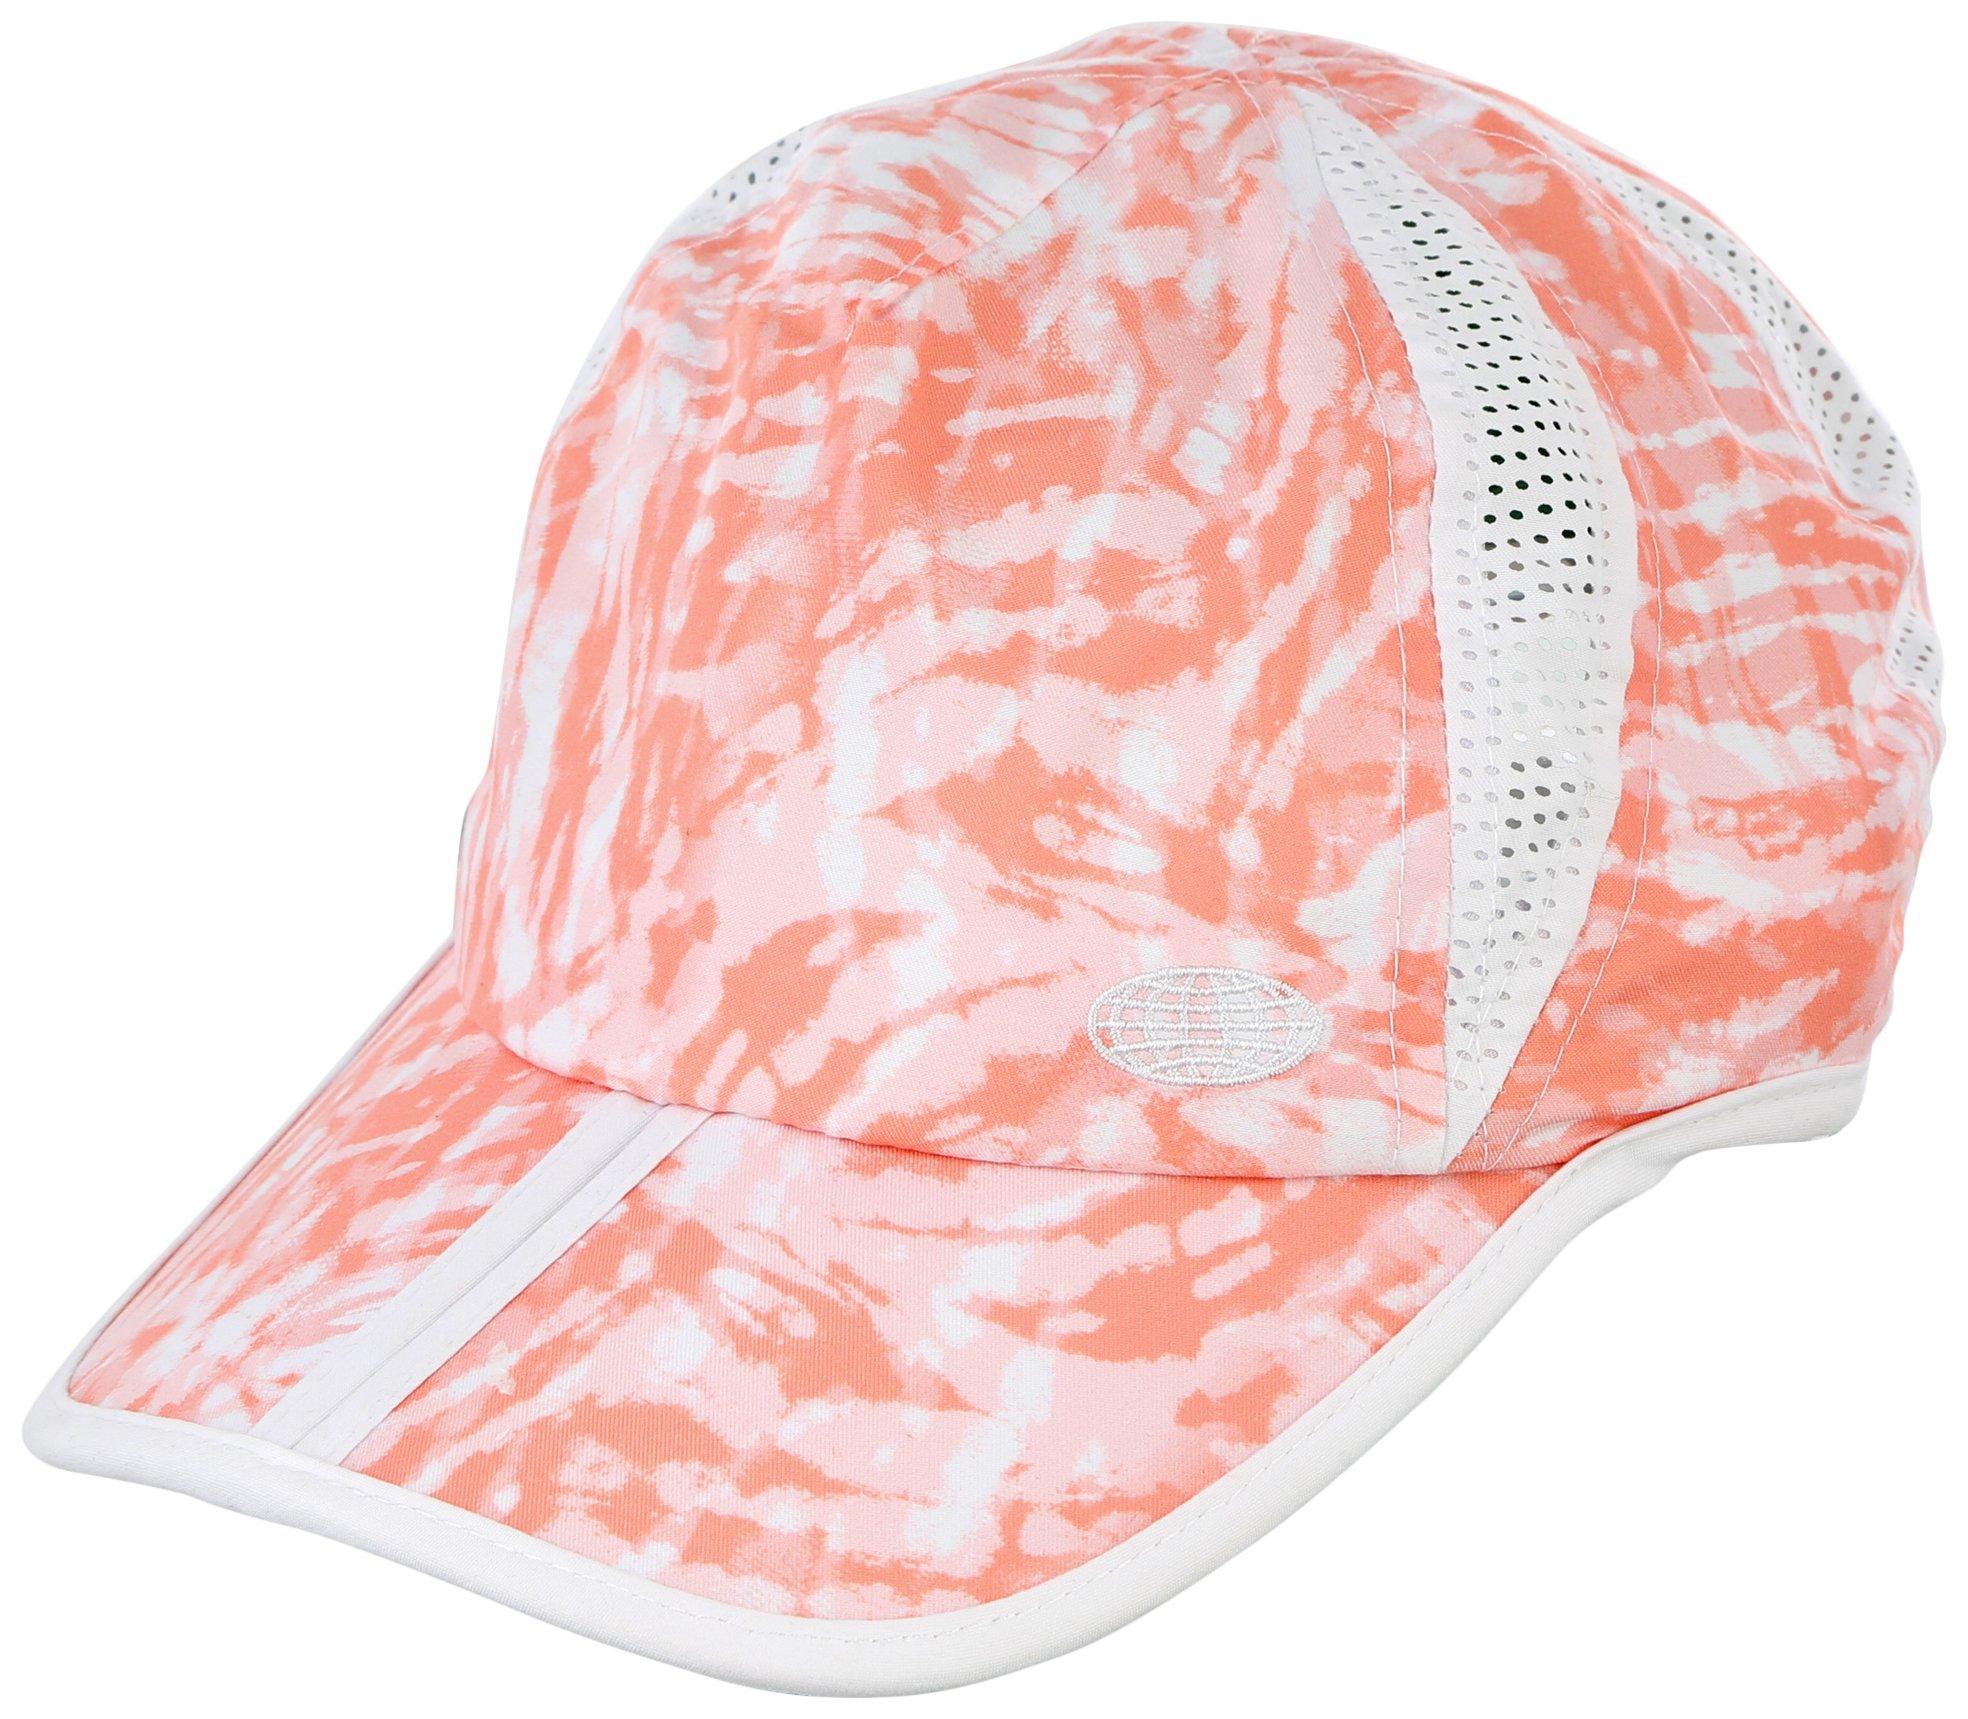 Womens Watercolor Print Foldable Vented Hat